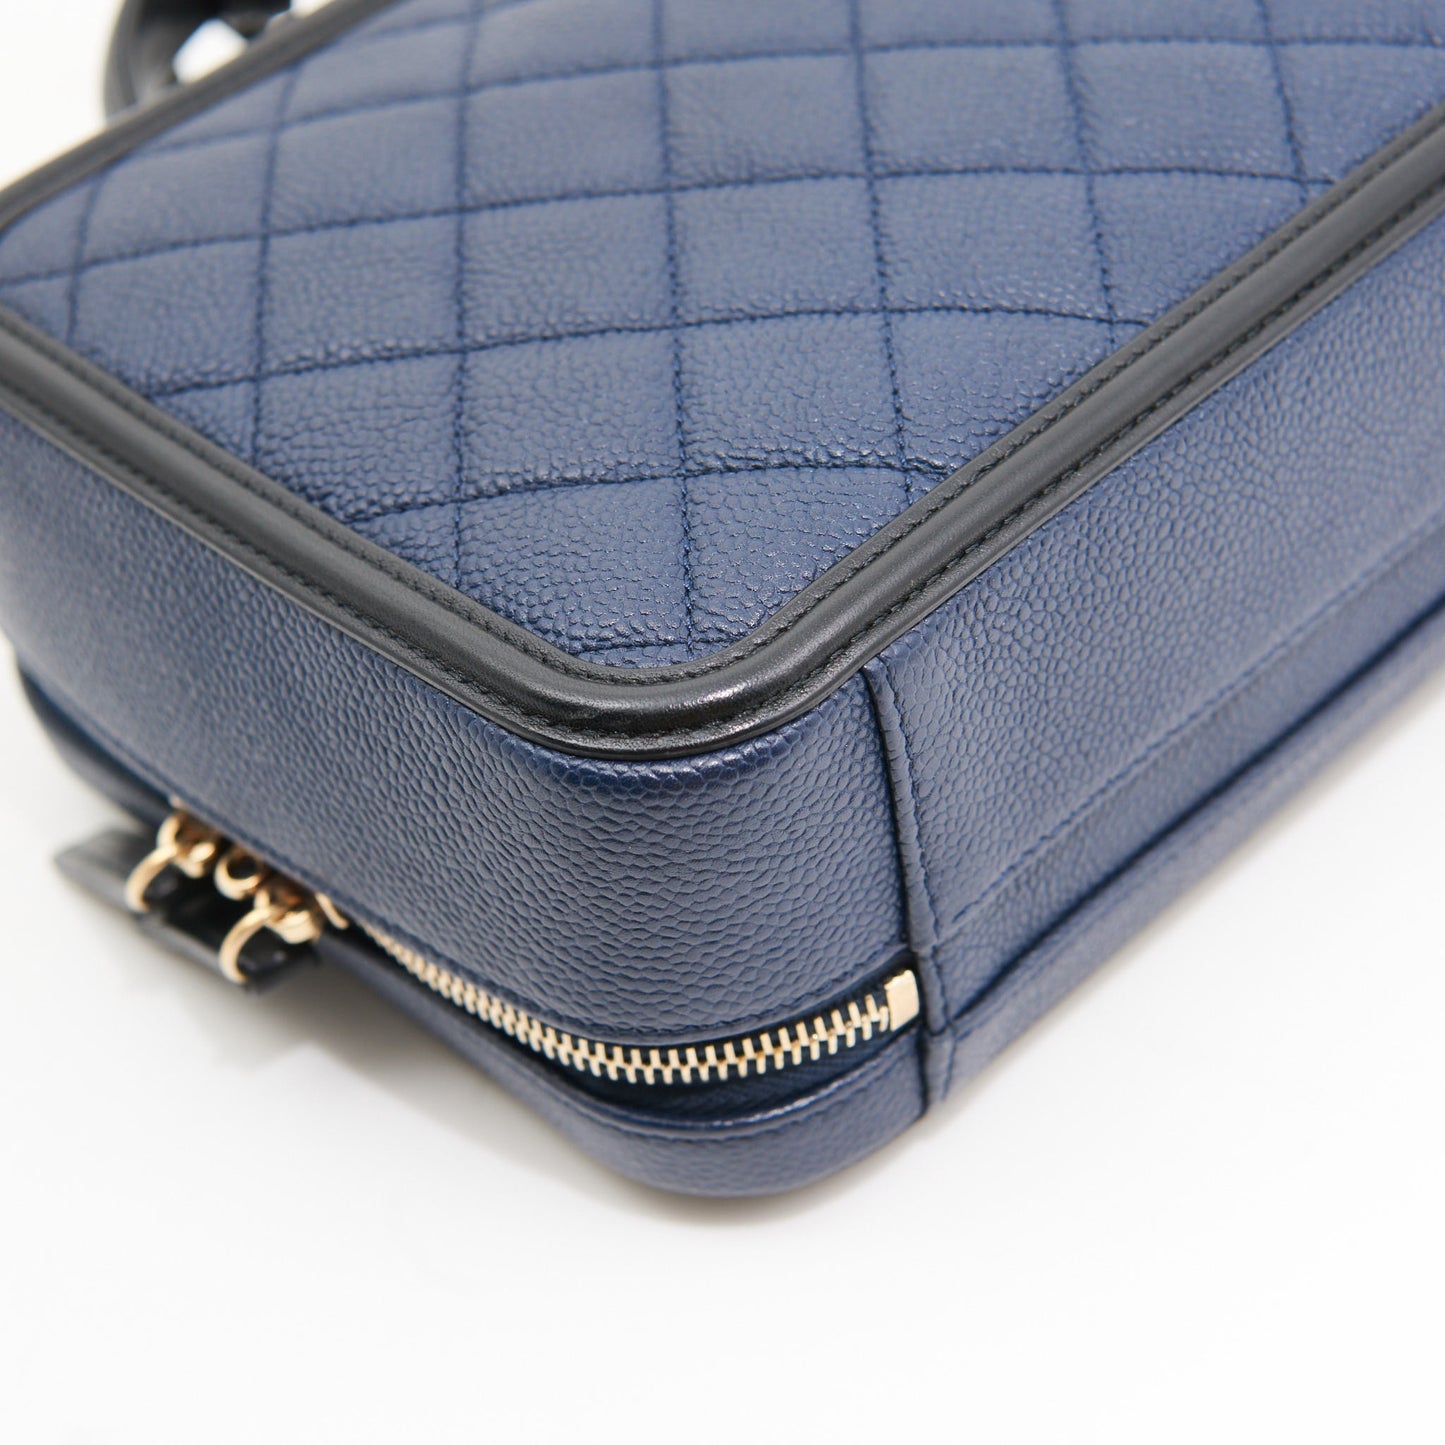 Chanel Caviar Quilted Handbag in Navy GHW